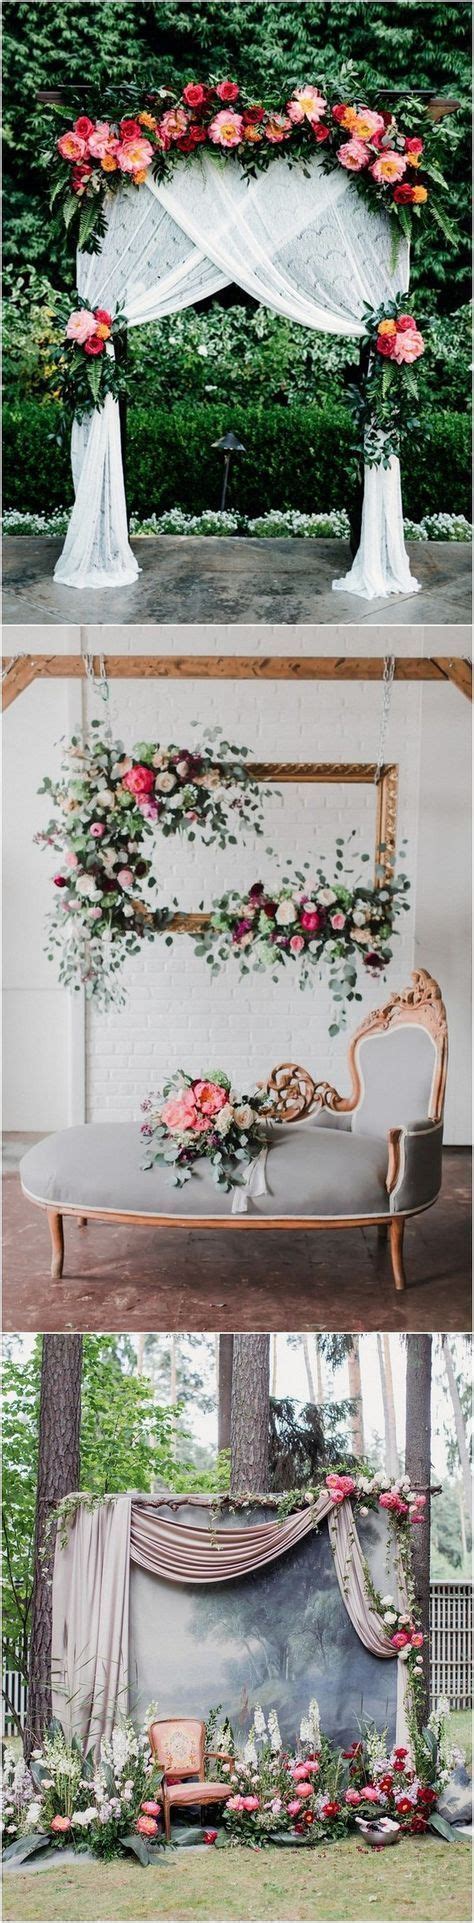 Trending 15 Hottest Wedding Backdrop Ideas For Your Ceremony Curtain